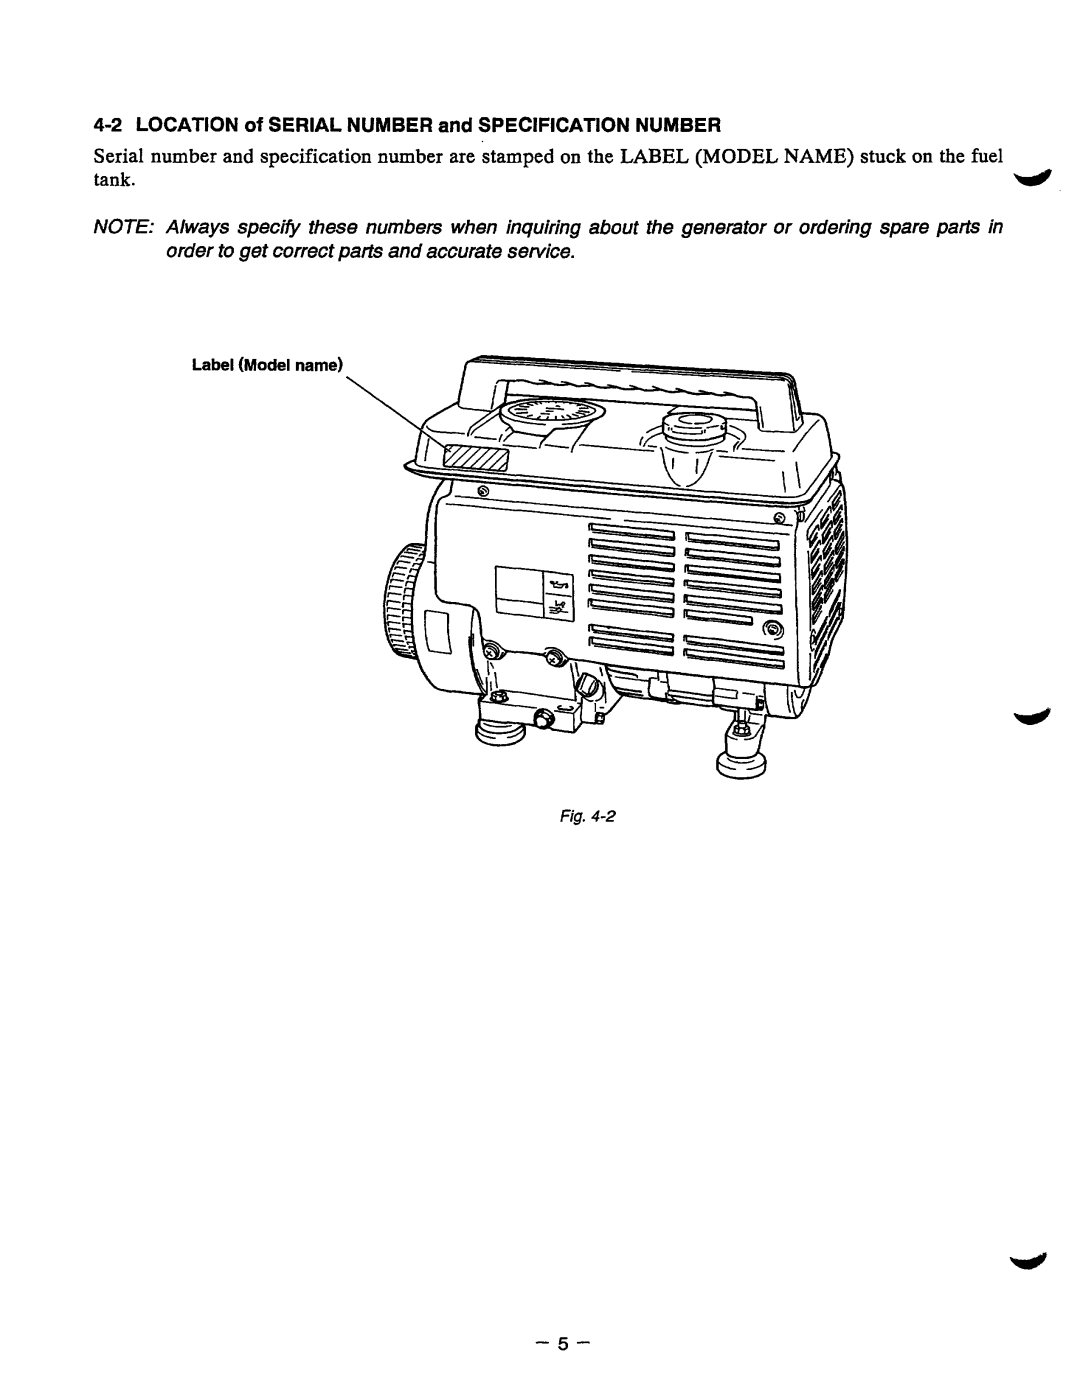 Baldor BALDOR GENERATOR, PC13R manual tank, LOCATION of SERIAL NUMBER and SPECIFICATION NUMBER 